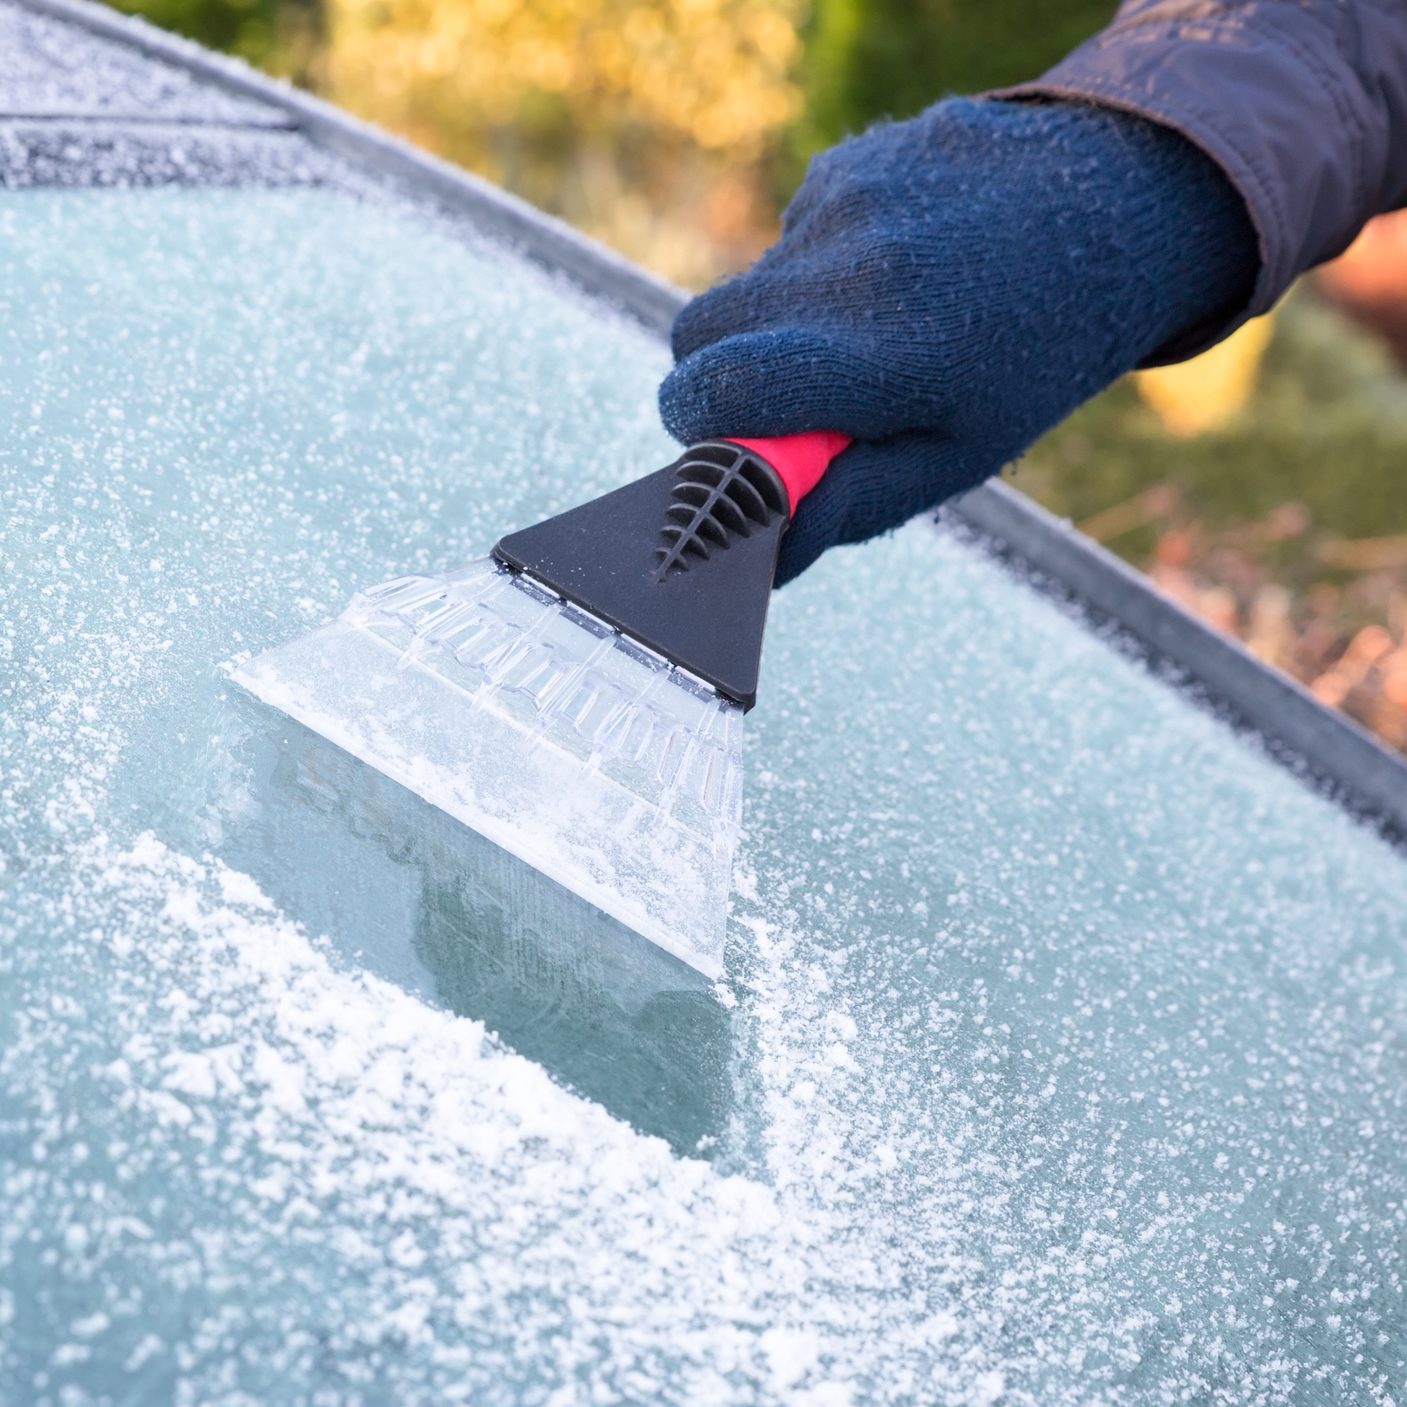 How Ice Scrapers Can Damage Your Car - DaSilva's Auto Body